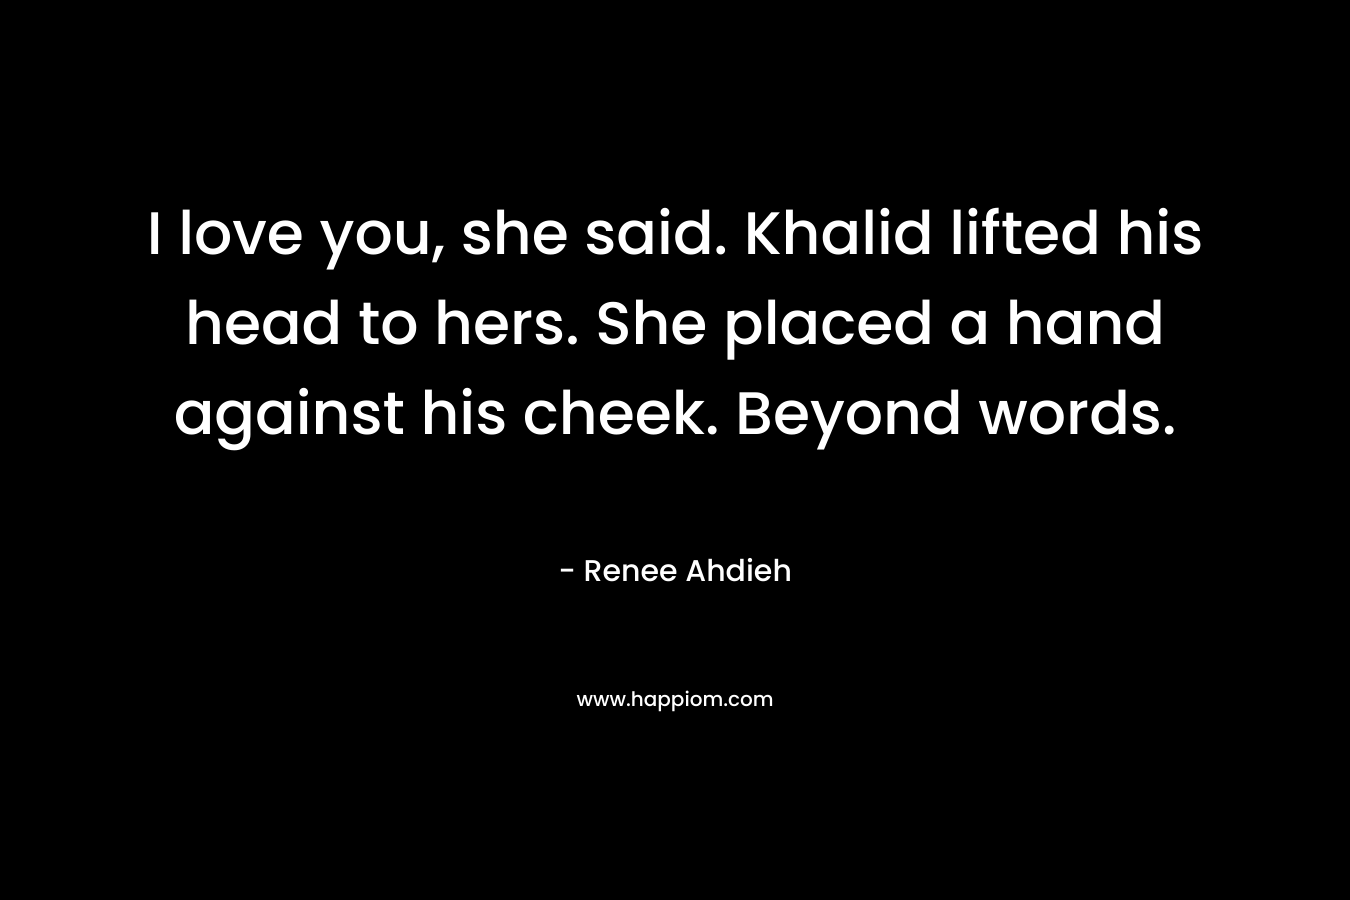 I love you, she said. Khalid lifted his head to hers. She placed a hand against his cheek. Beyond words.